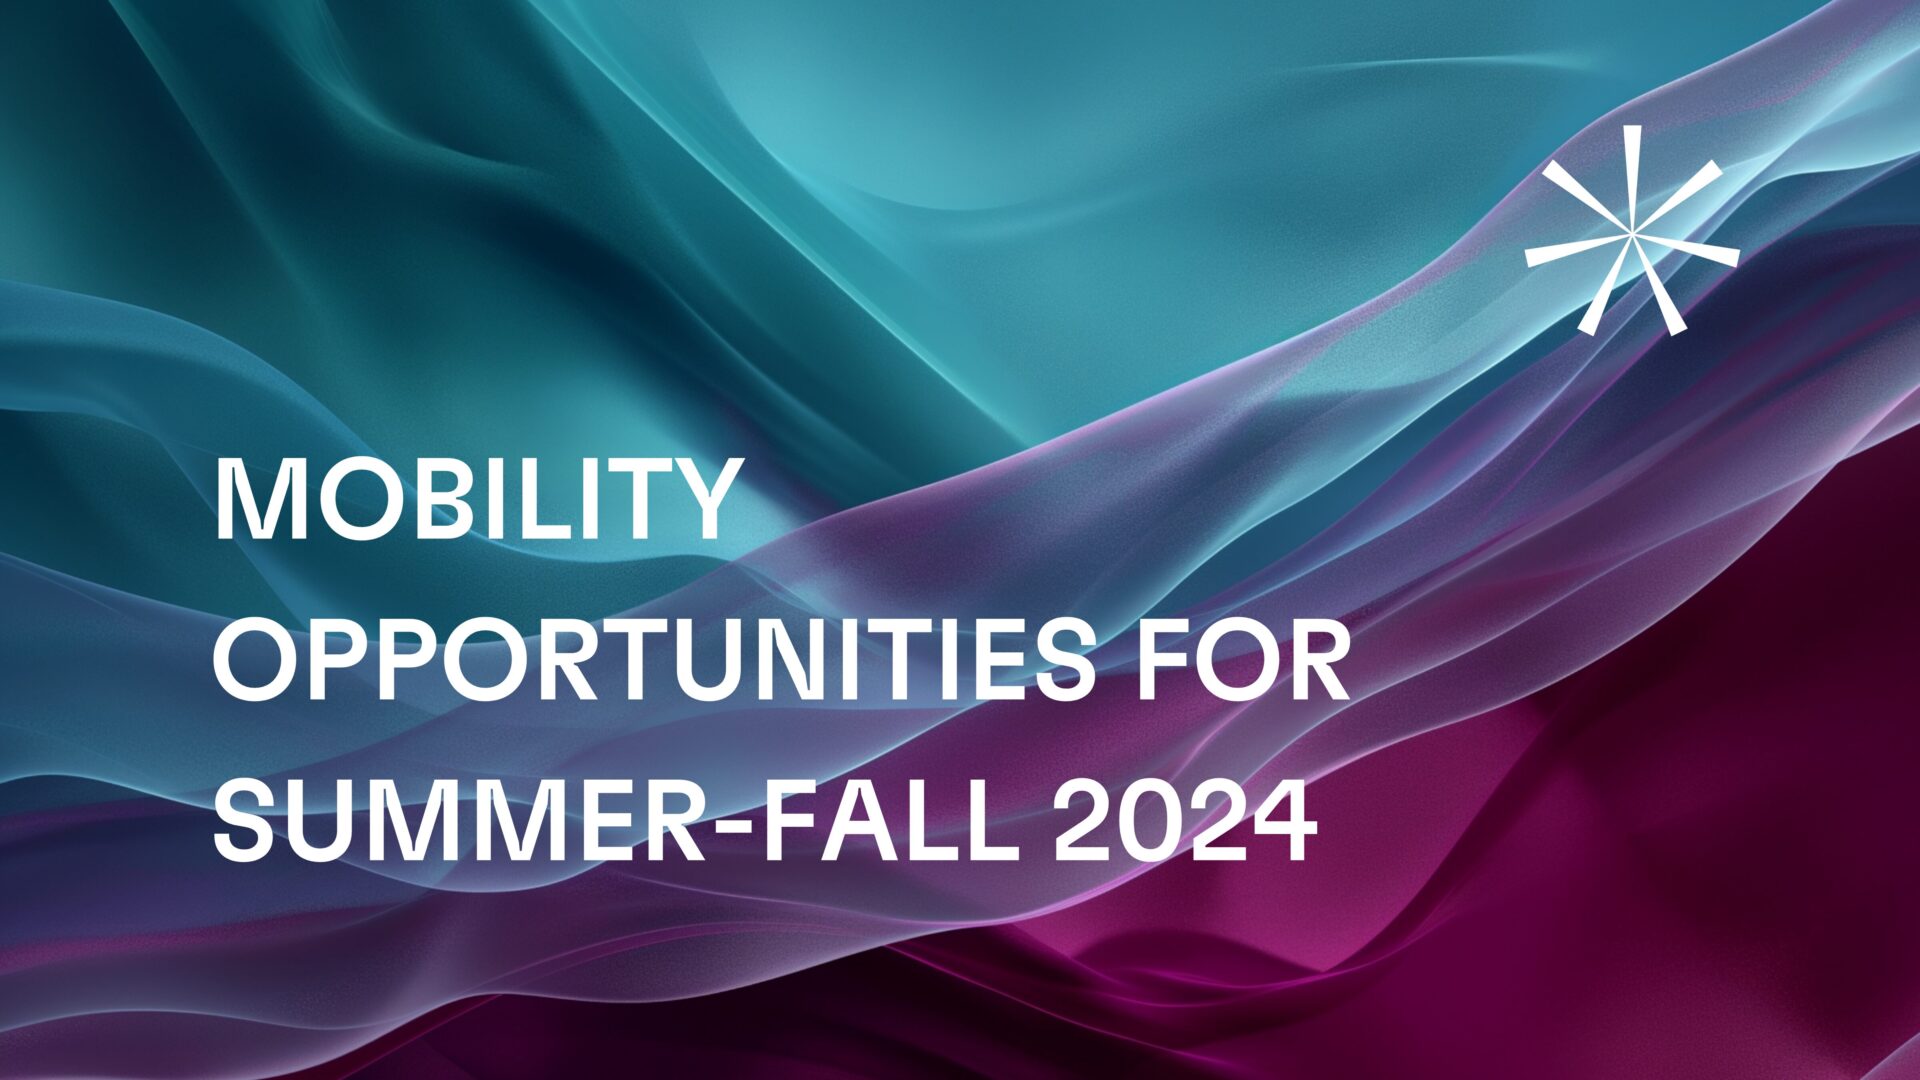 MOBILITY OPPORTUNITIES FOR SPRING - SUMMER 2024 (1)